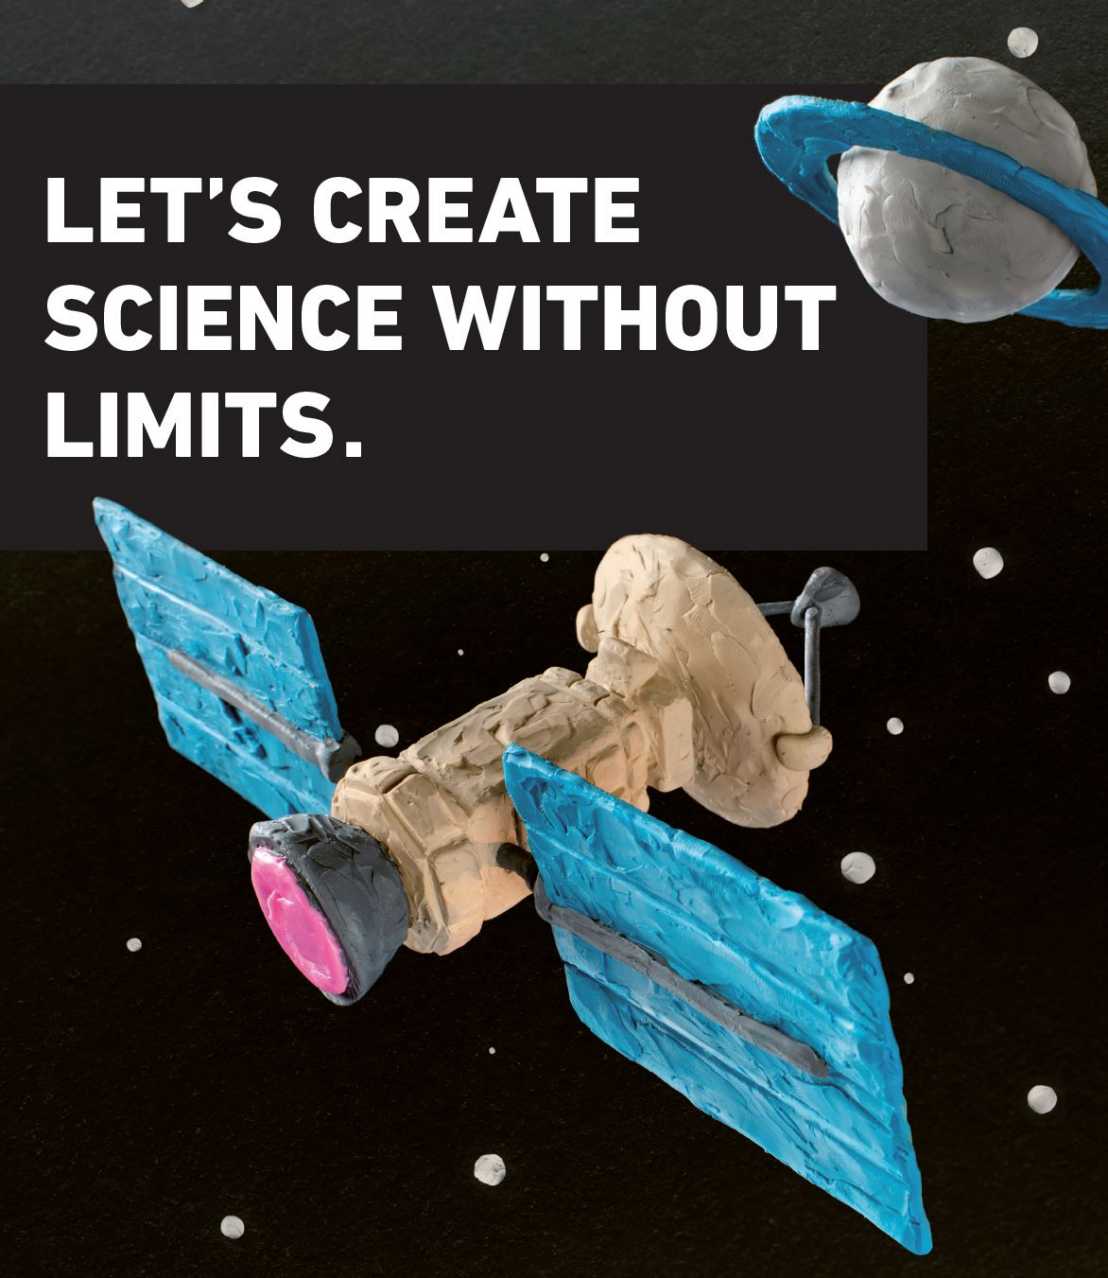 A satellite and a planet, both kneaded from plasticine and placed next to the slogan of the campaigne "Let`s create science without limits!"